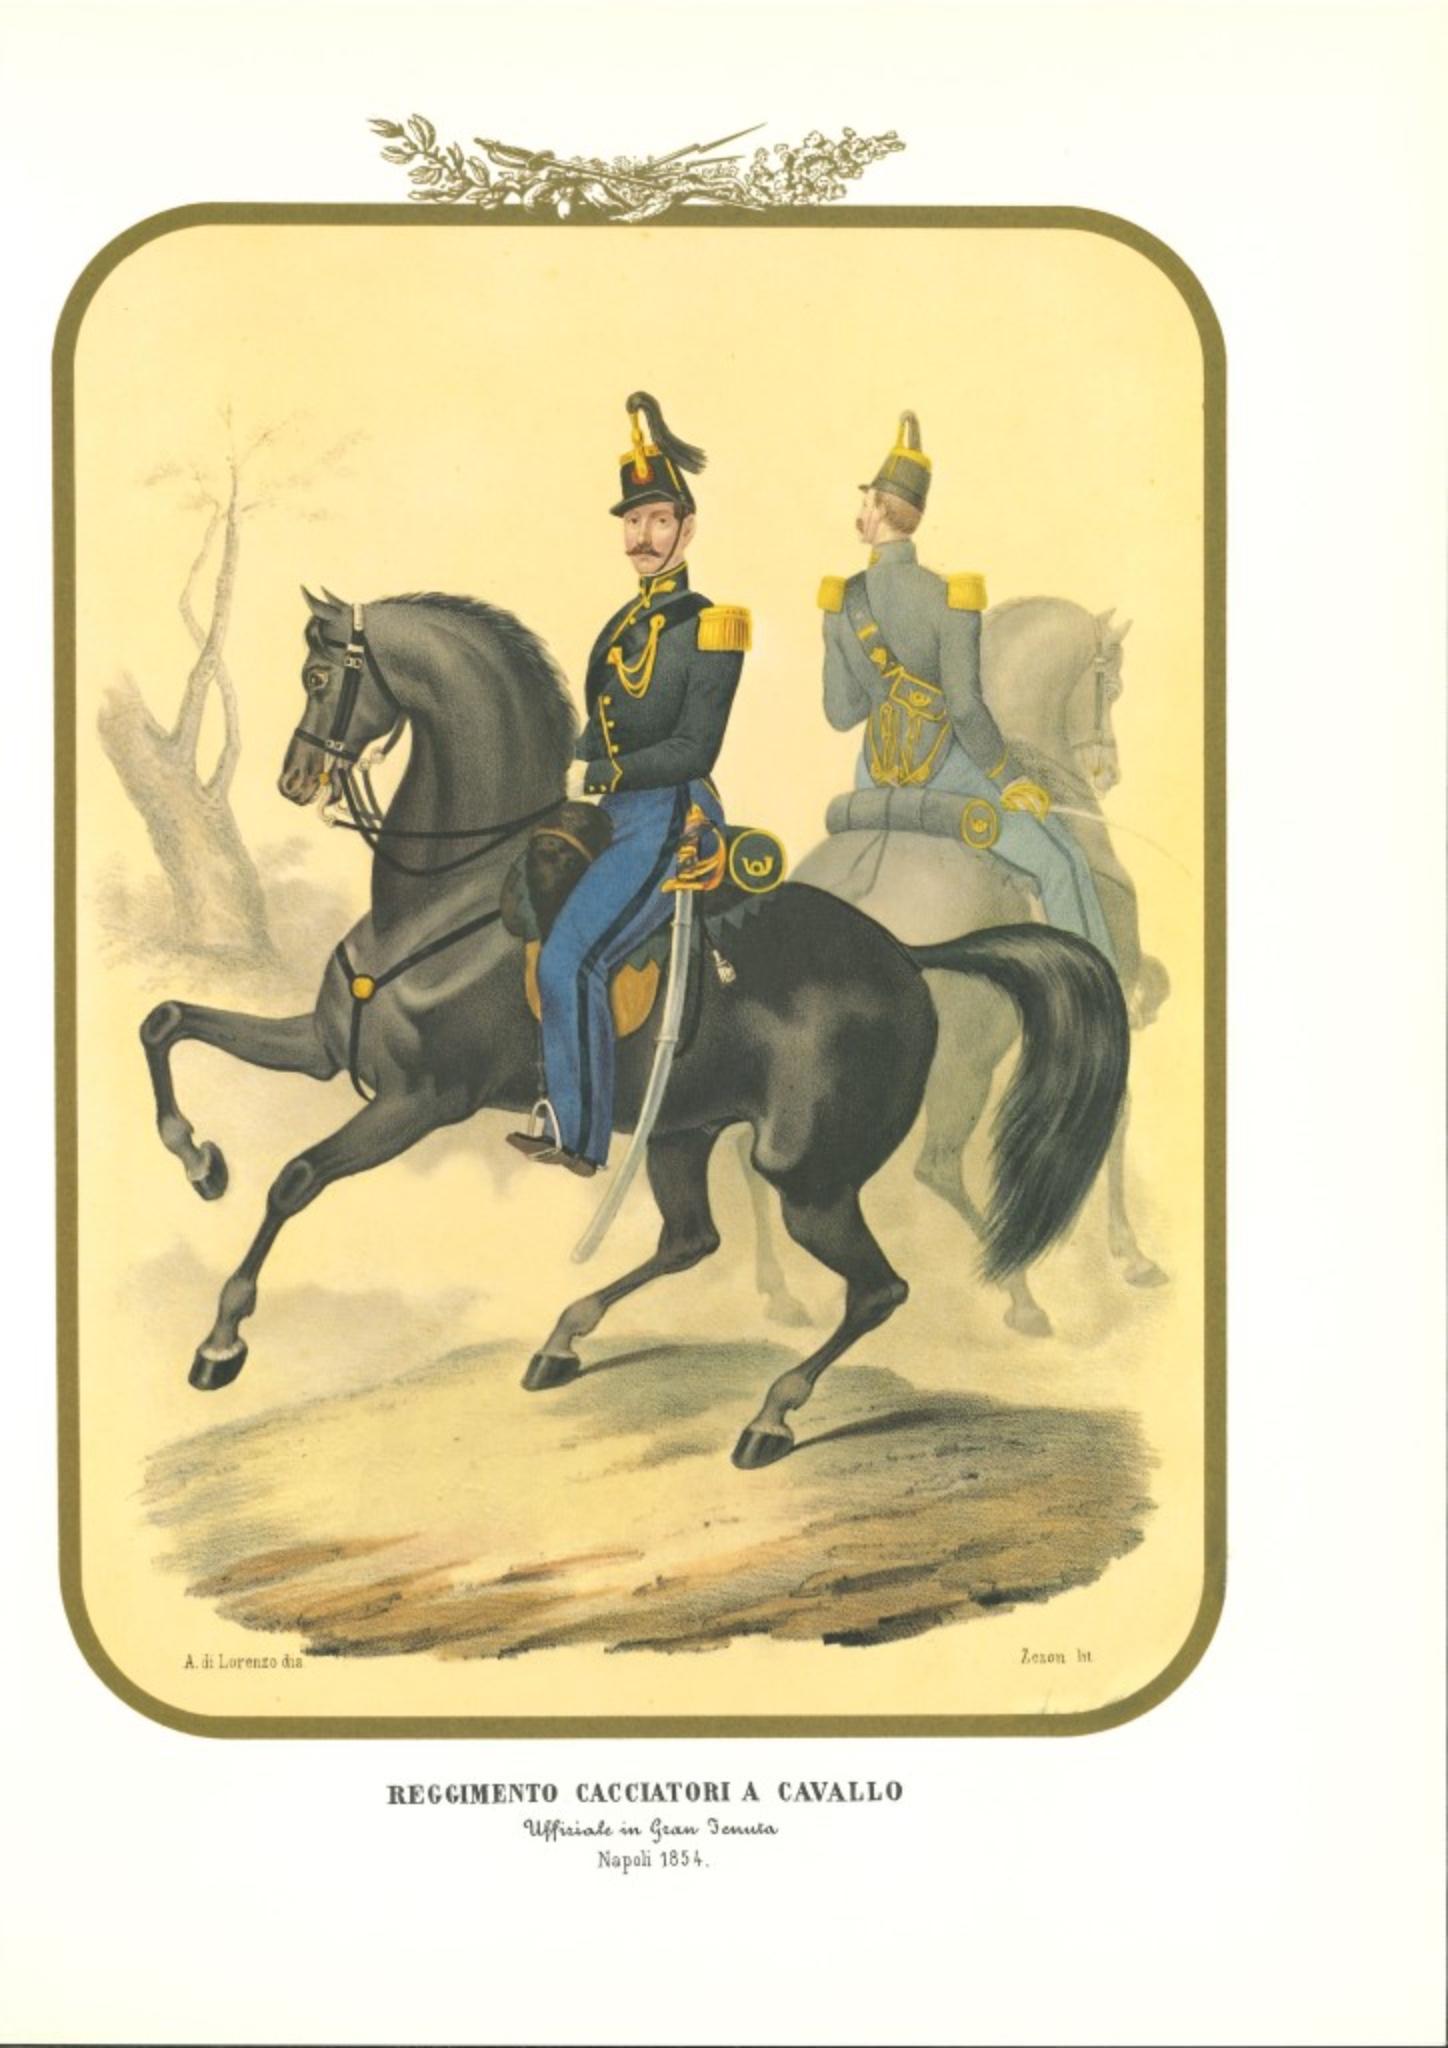 Regiment of Hunters on Horseback 2 is a lithograph by Antonio Zezon. Naples 1854.

Interesting colored lithograph which describes two members of the Regiment of Hunters on Horseback: in the foreground an Officer riding his horse.

In excellent